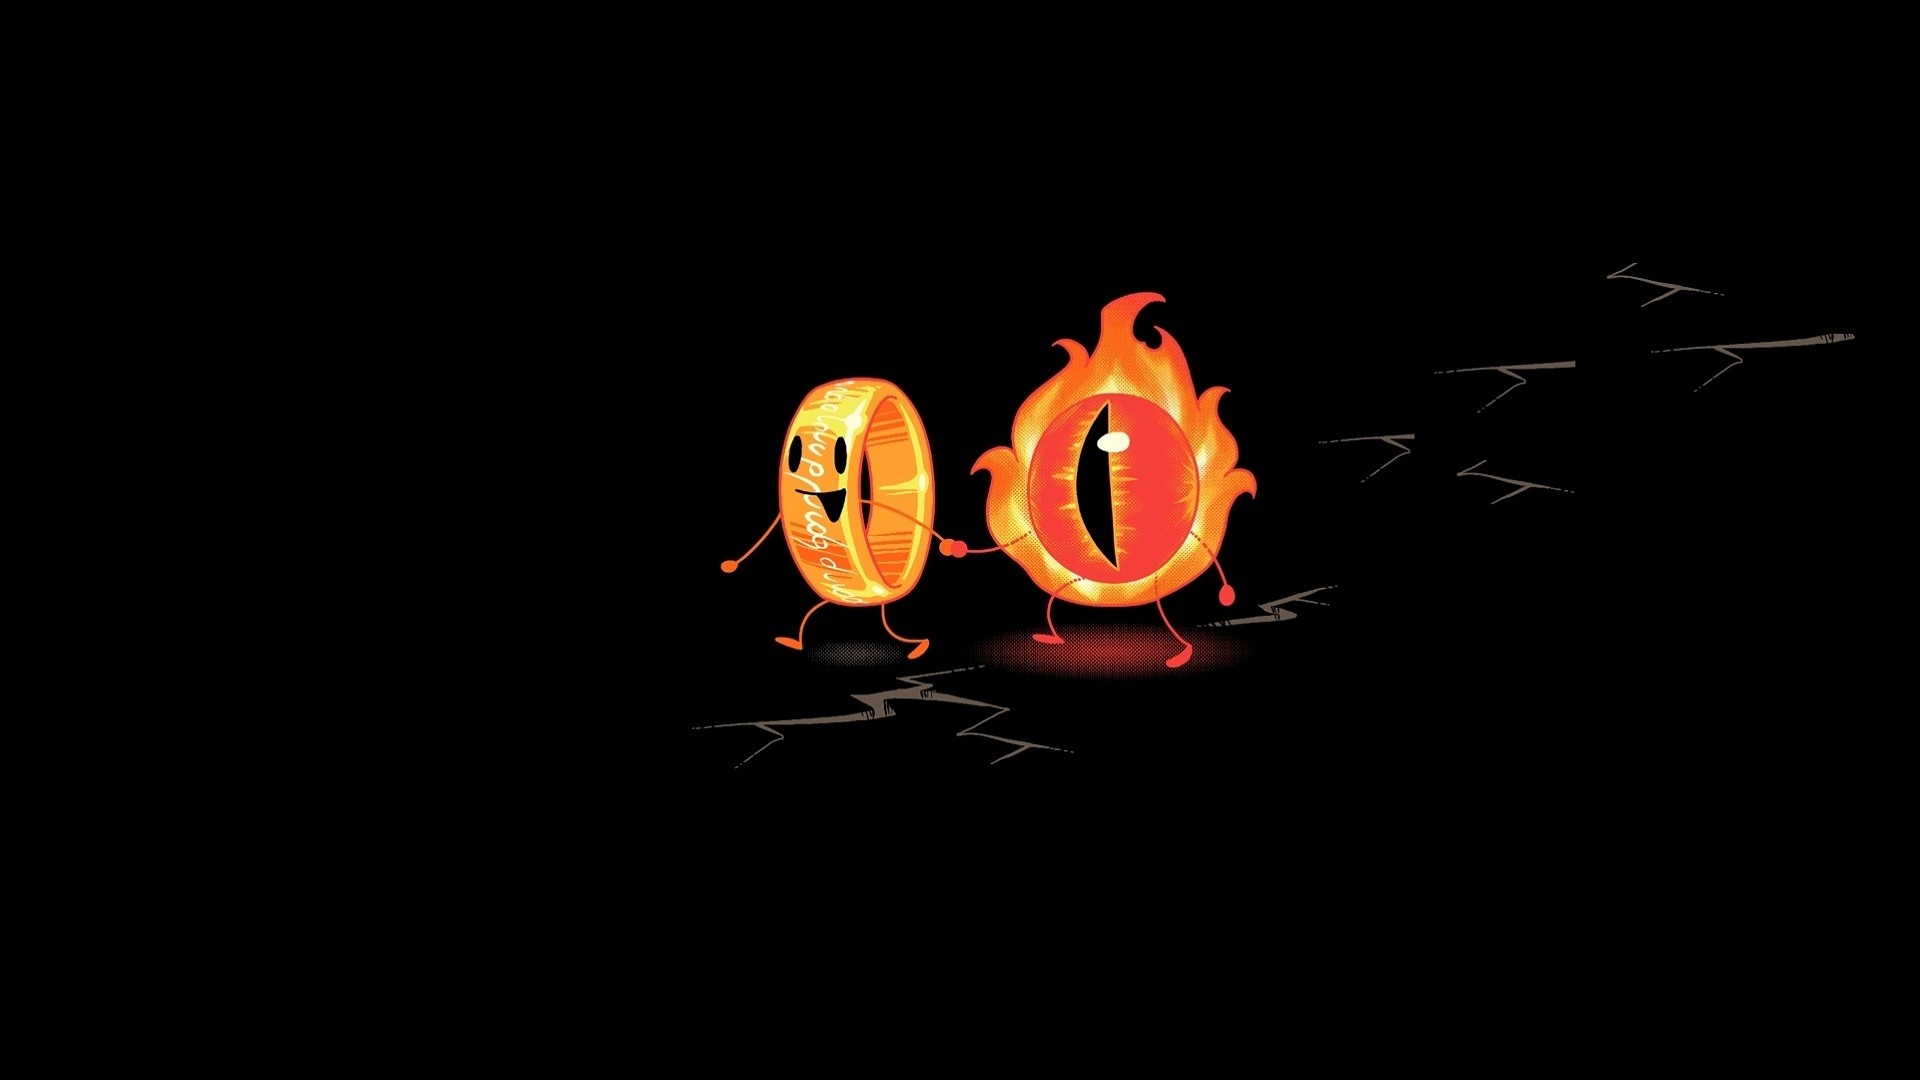 Sauron, Eyes, The Eye of Sauron, The Lord of the Rings, The One Ring, Simple background, Digital art, Black background, Miniatures, Friendship, Rings, Humor, Minimalism, Black Wallpaper